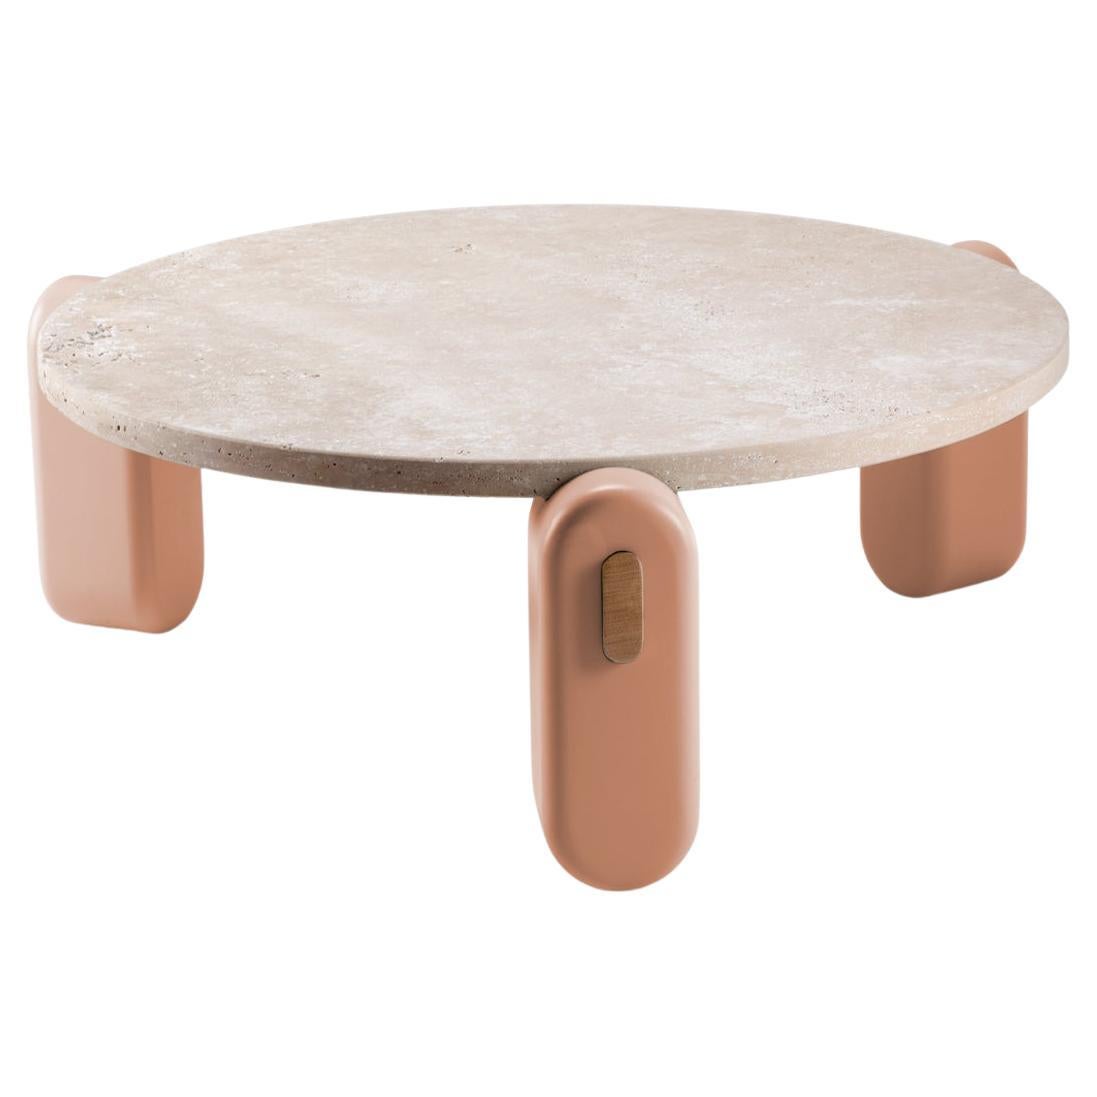 Mona Center Table with Travertine Top, Powder Lacquered Feet and Wood Structure